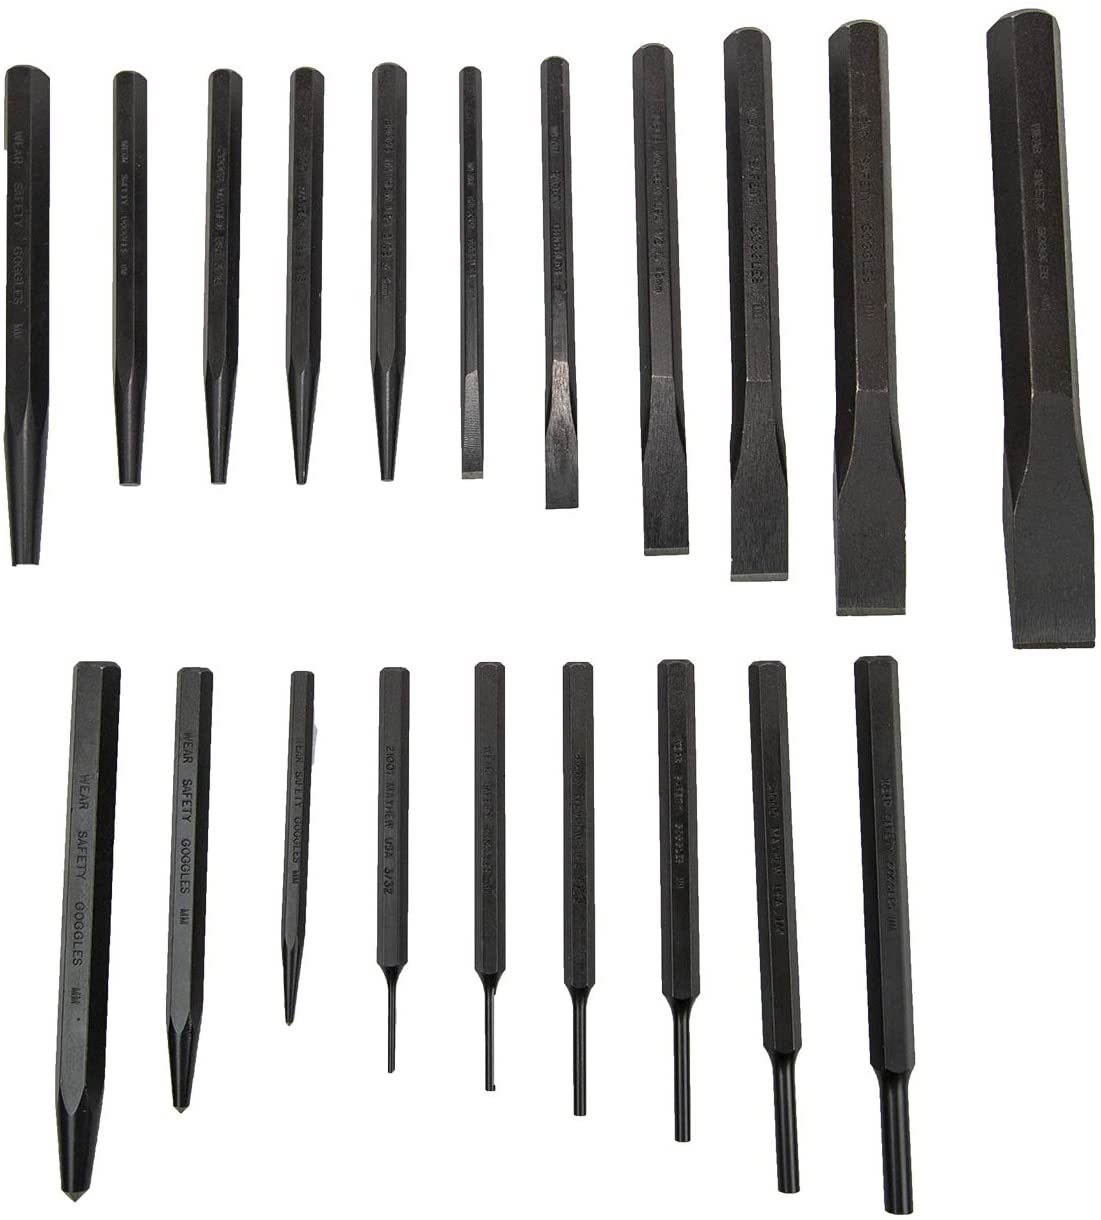 Mayhew Punch and Chisel 20-Piece Set - MPR Tools & Equipment